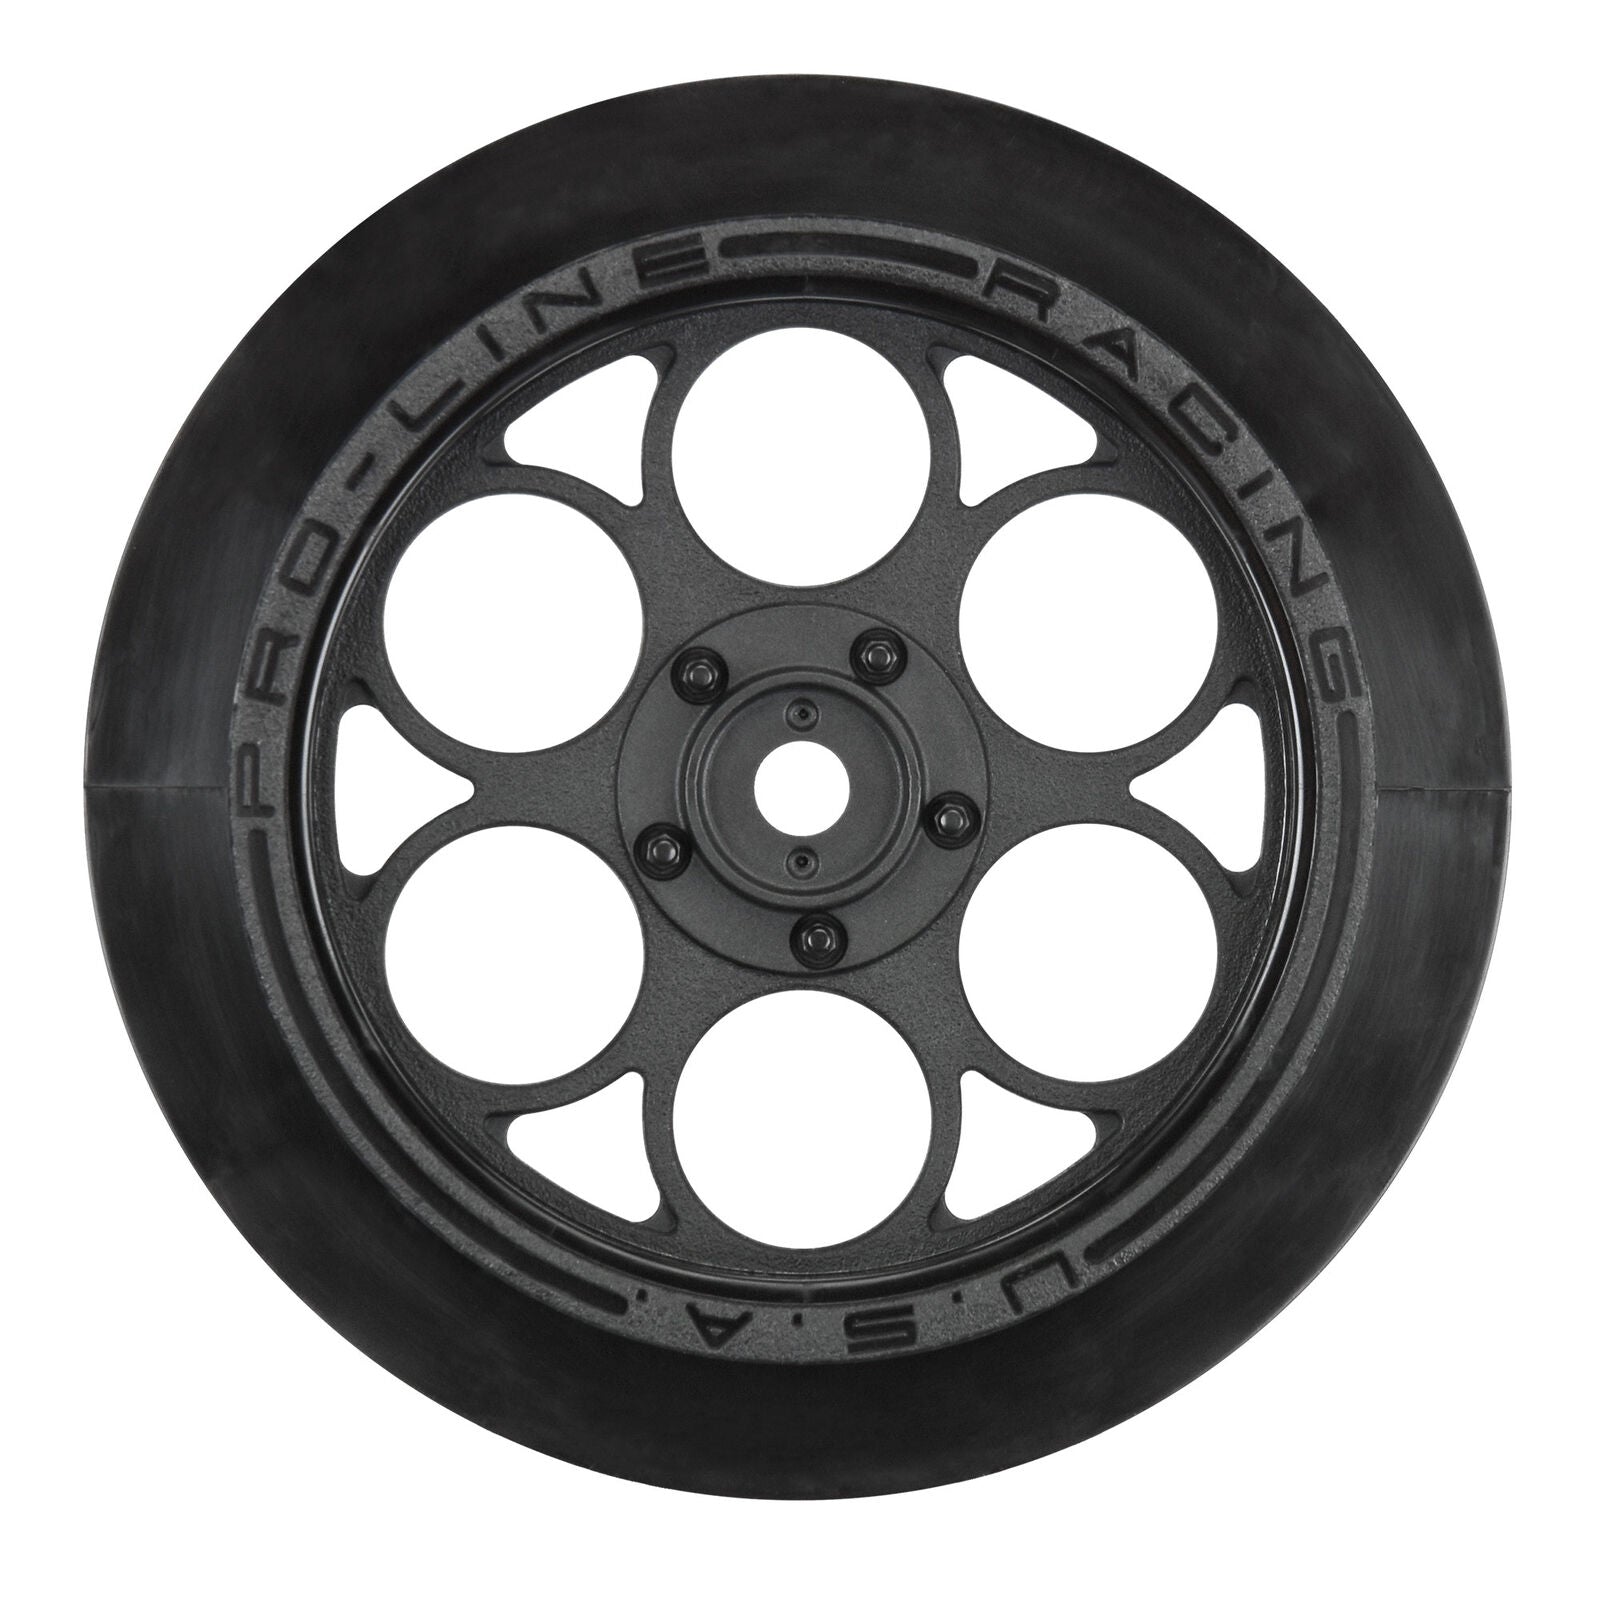 Pro-Line Showtime Front Drag Racing Wheels w/12mm Hex (Black) (2)